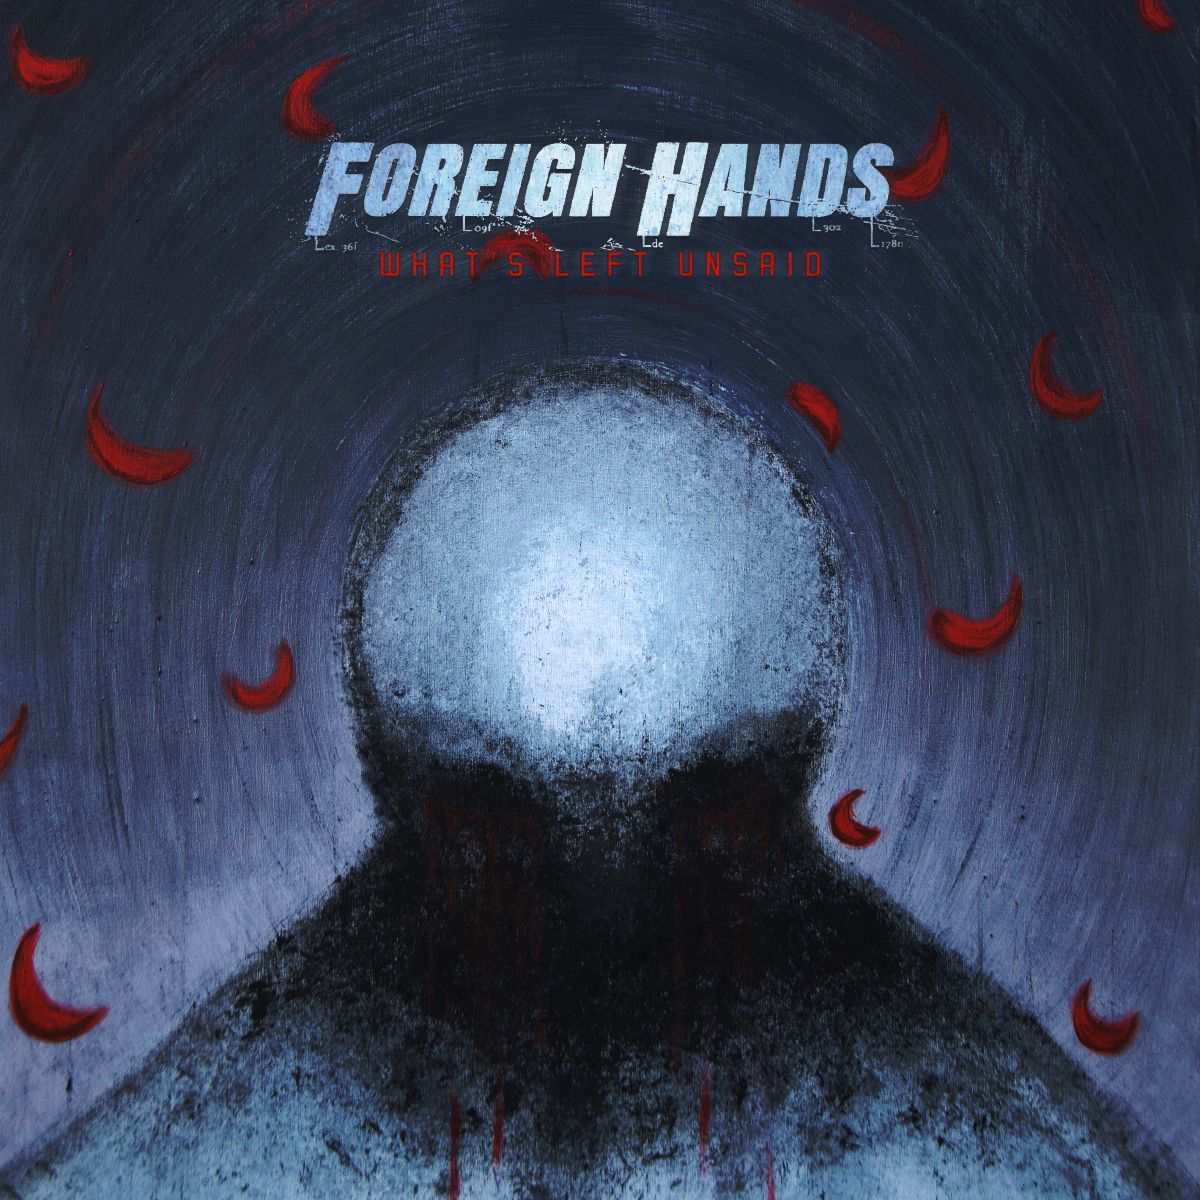 2. Whats Left Unsaid Foreign Hands